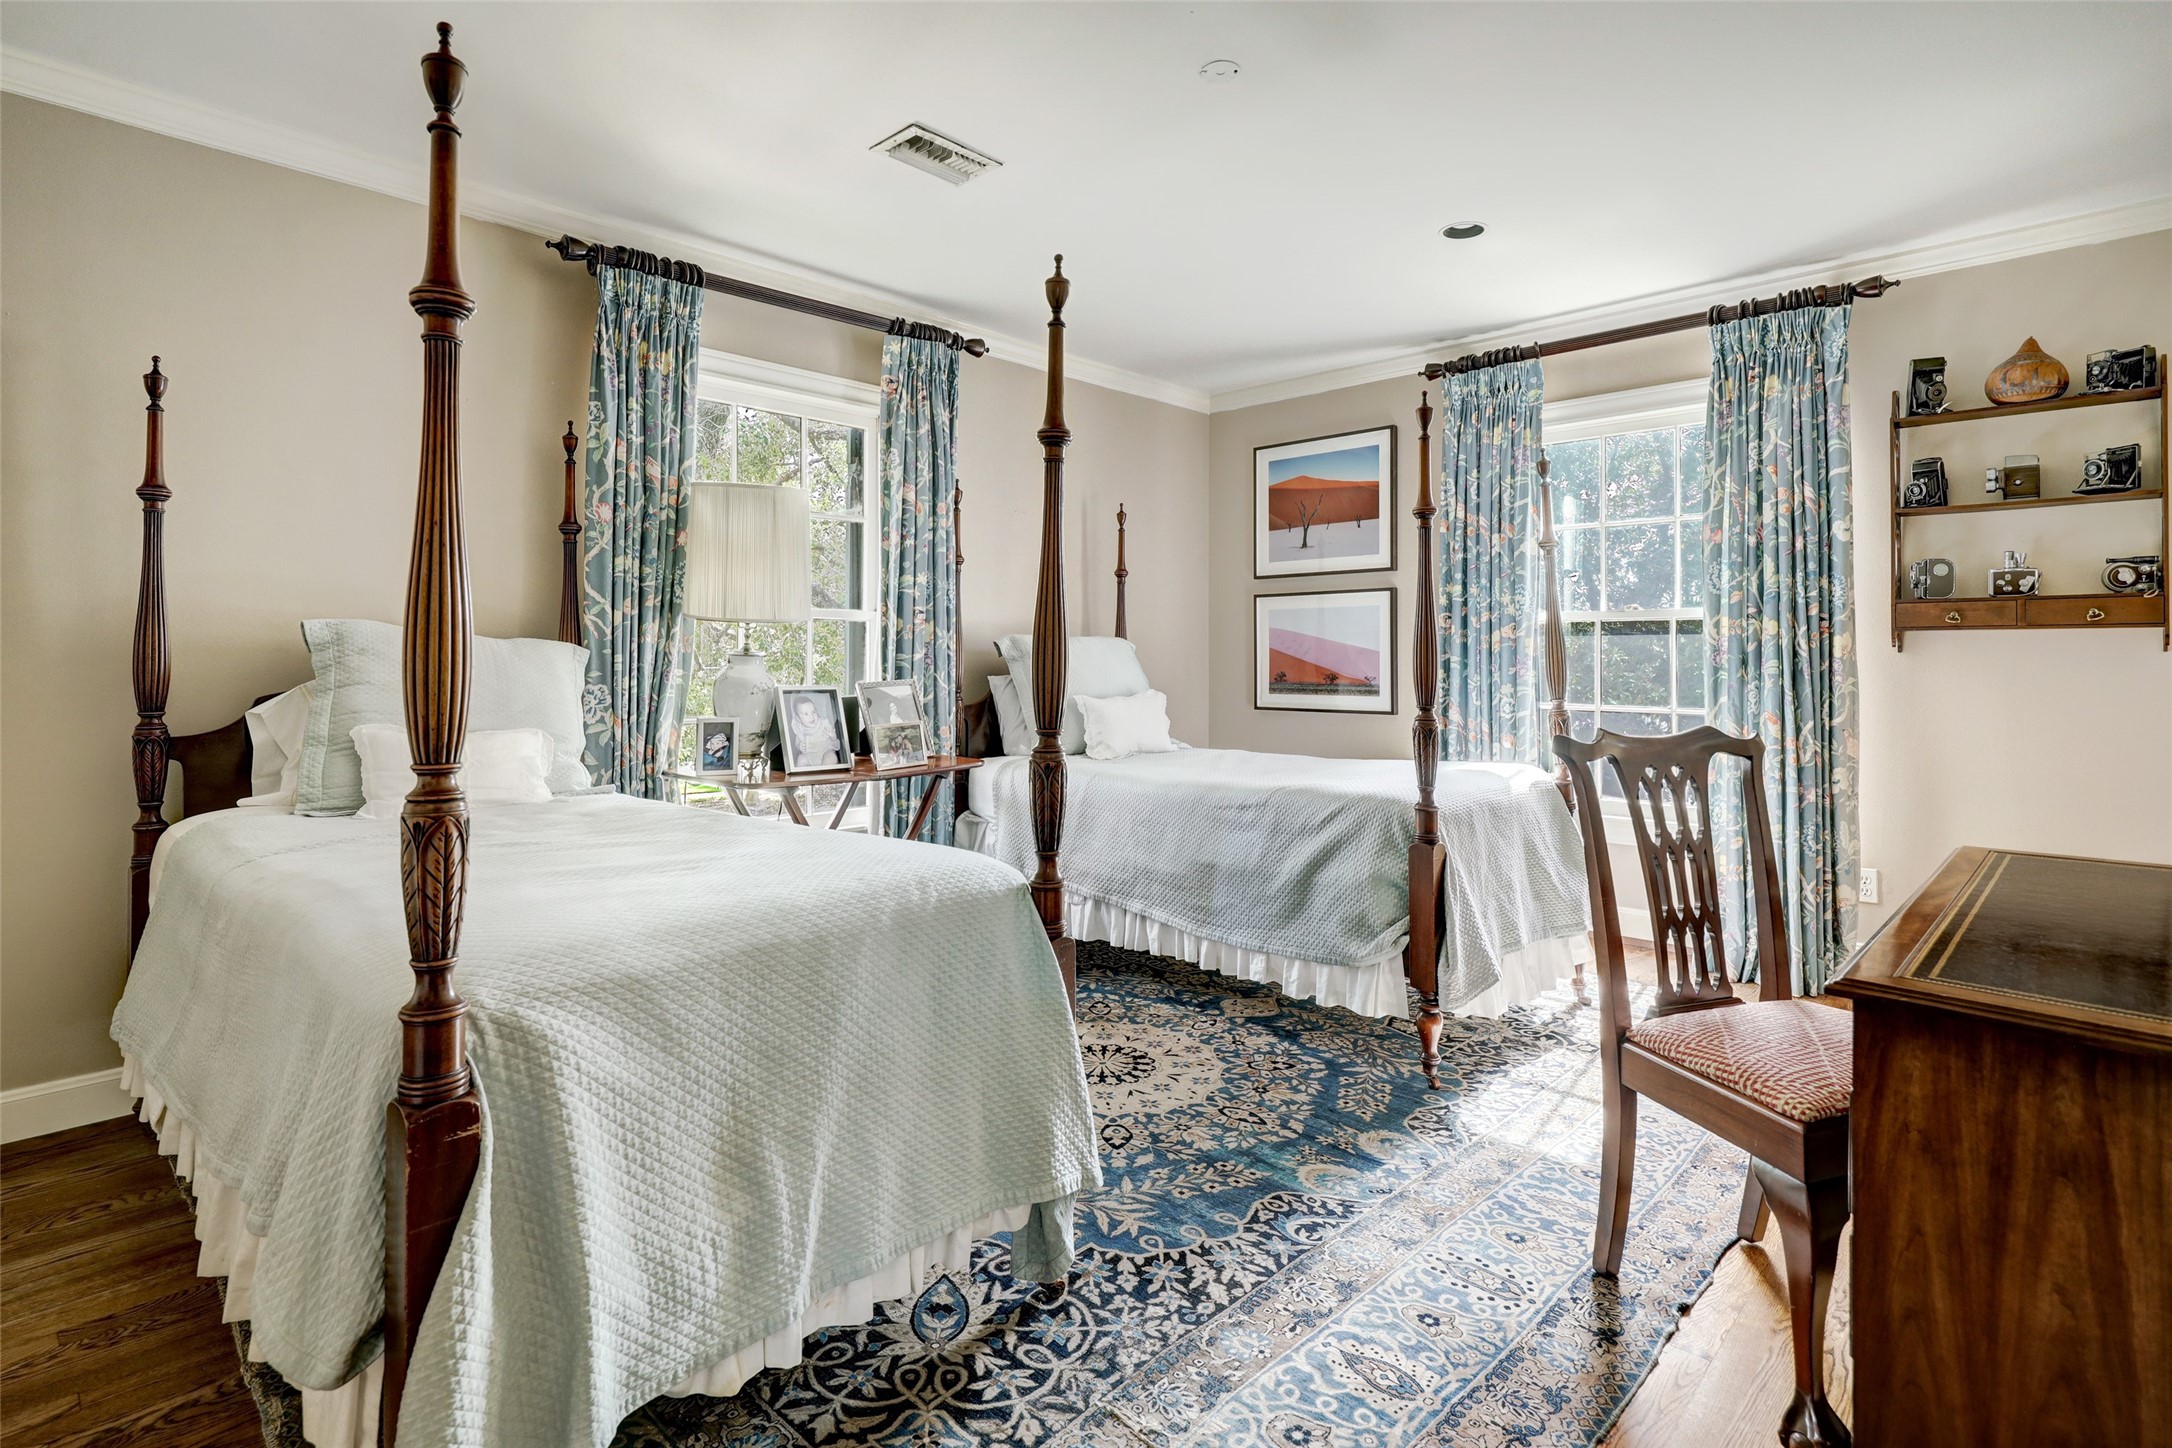 This secondary bedroom offers a comfortable and stylish retreat, where the combination of the handsome hardwood floors and flood of natural light creates a harmonious and visually pleasing environment.